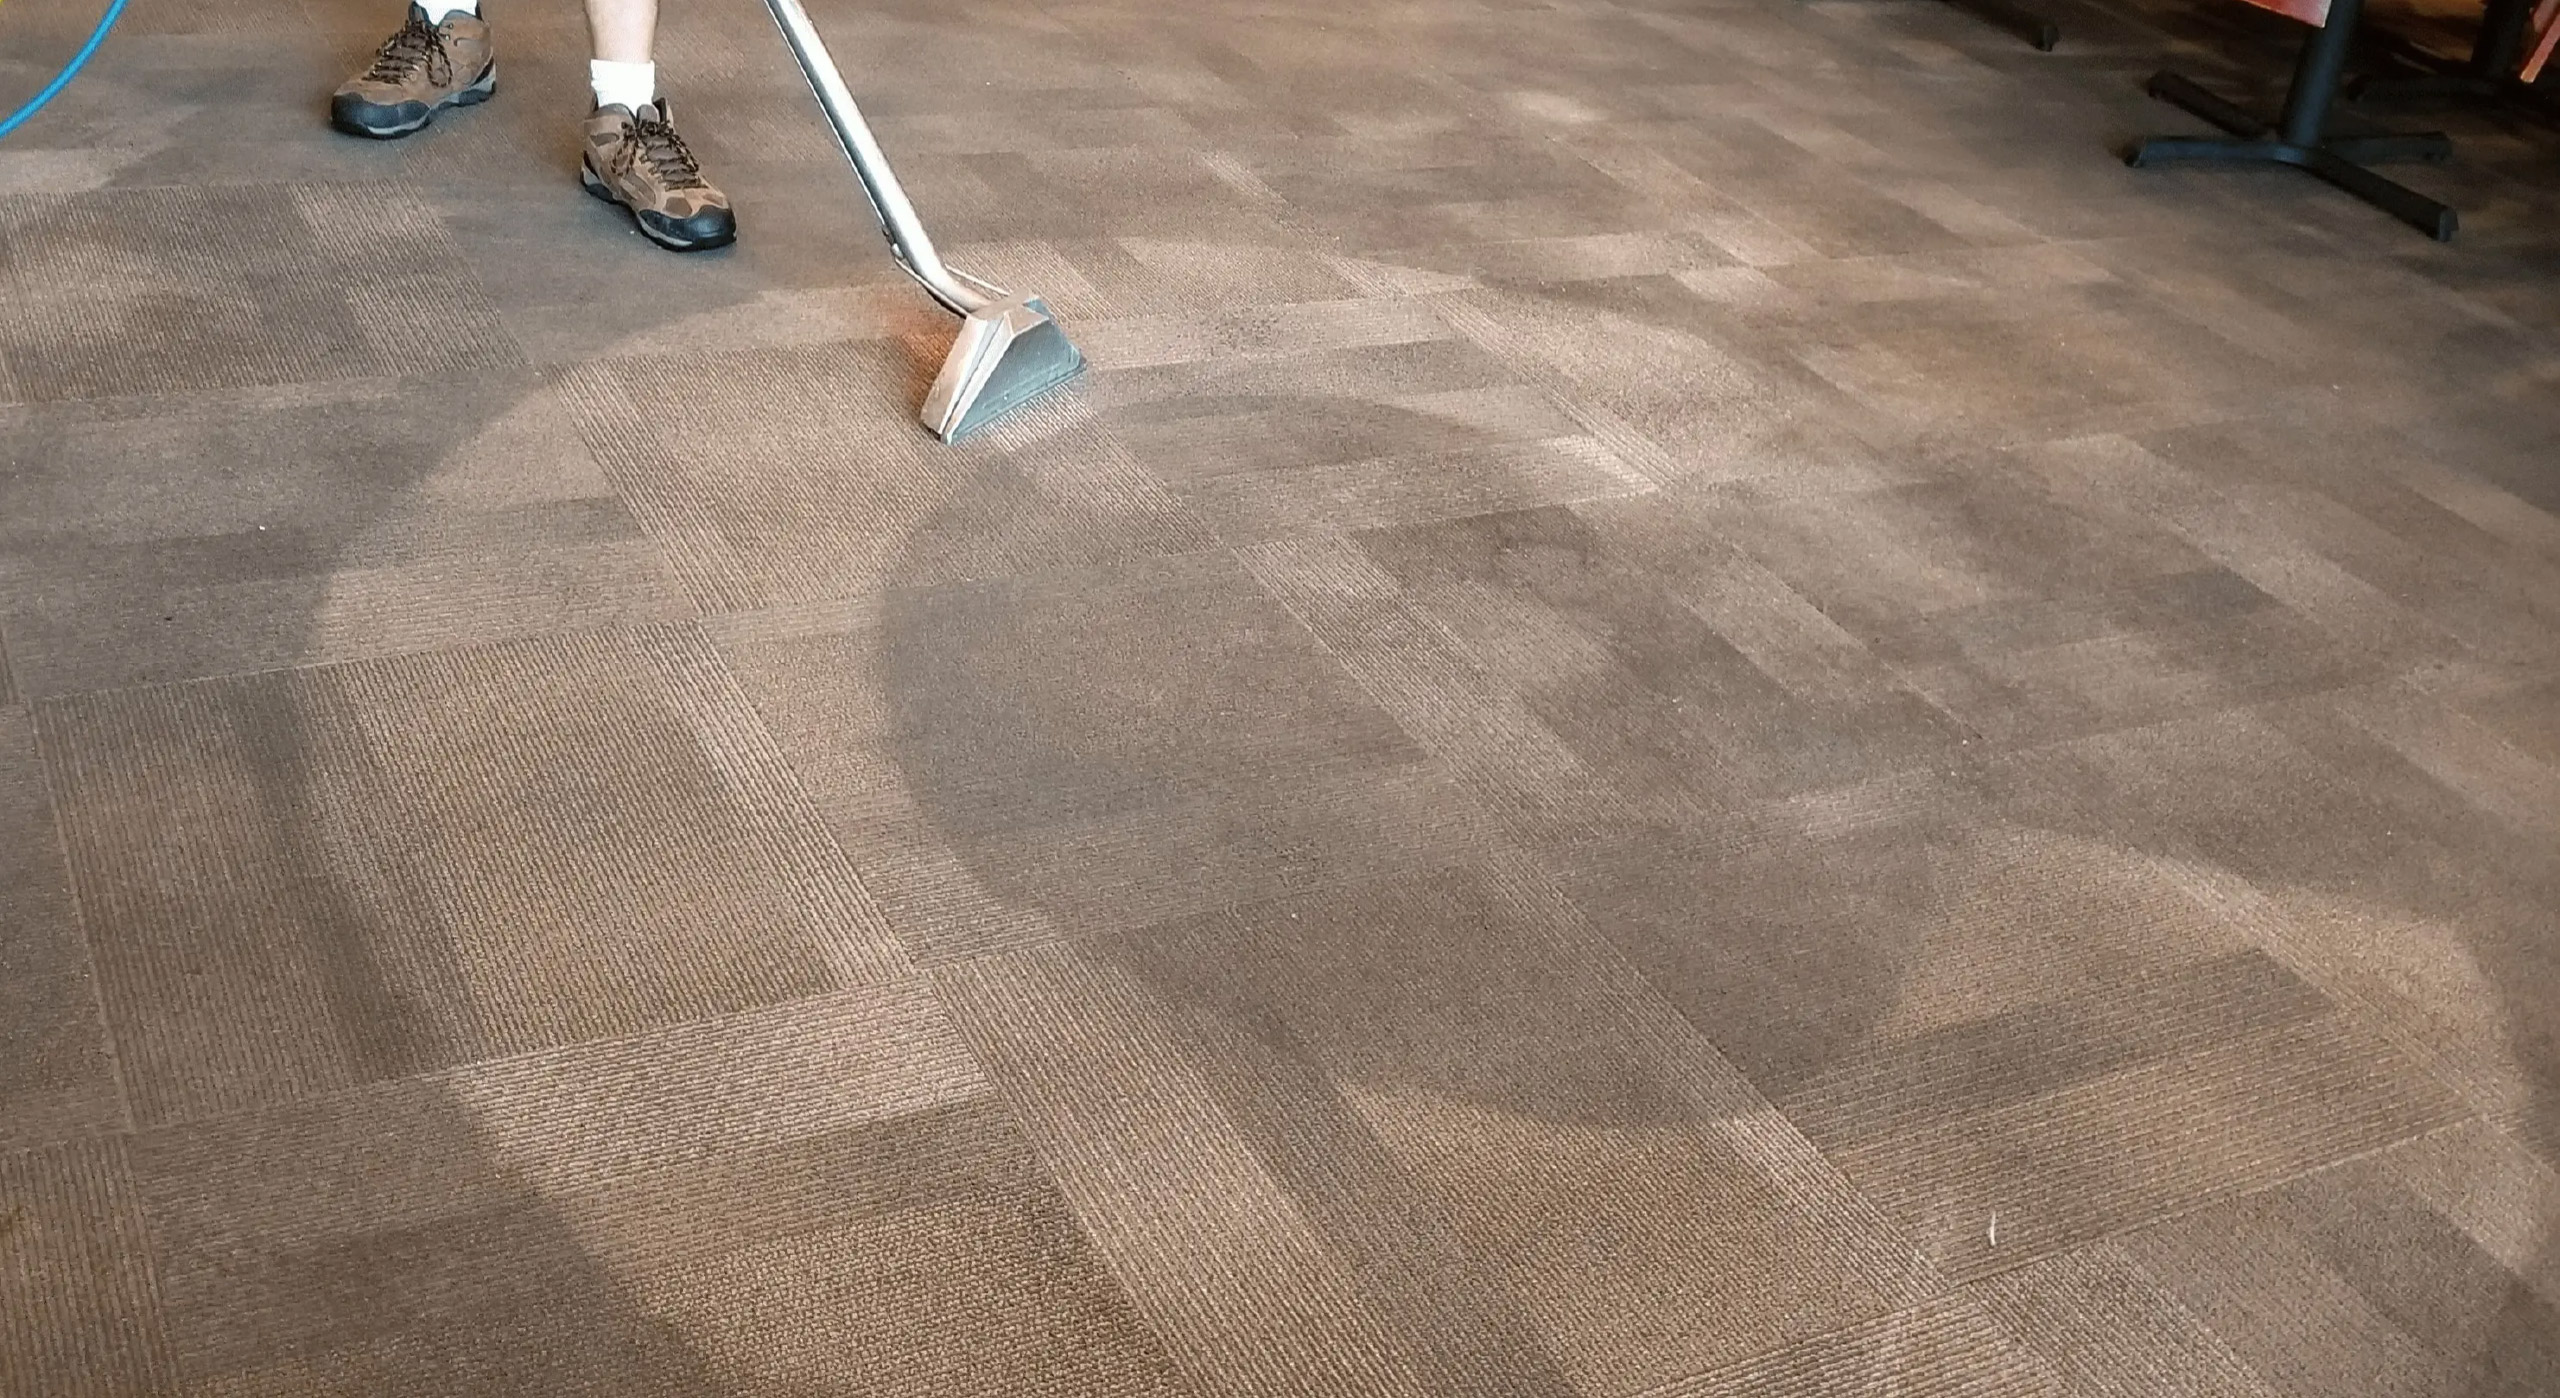 Remarkable Changes after a Professional Carpet Cleaning Job